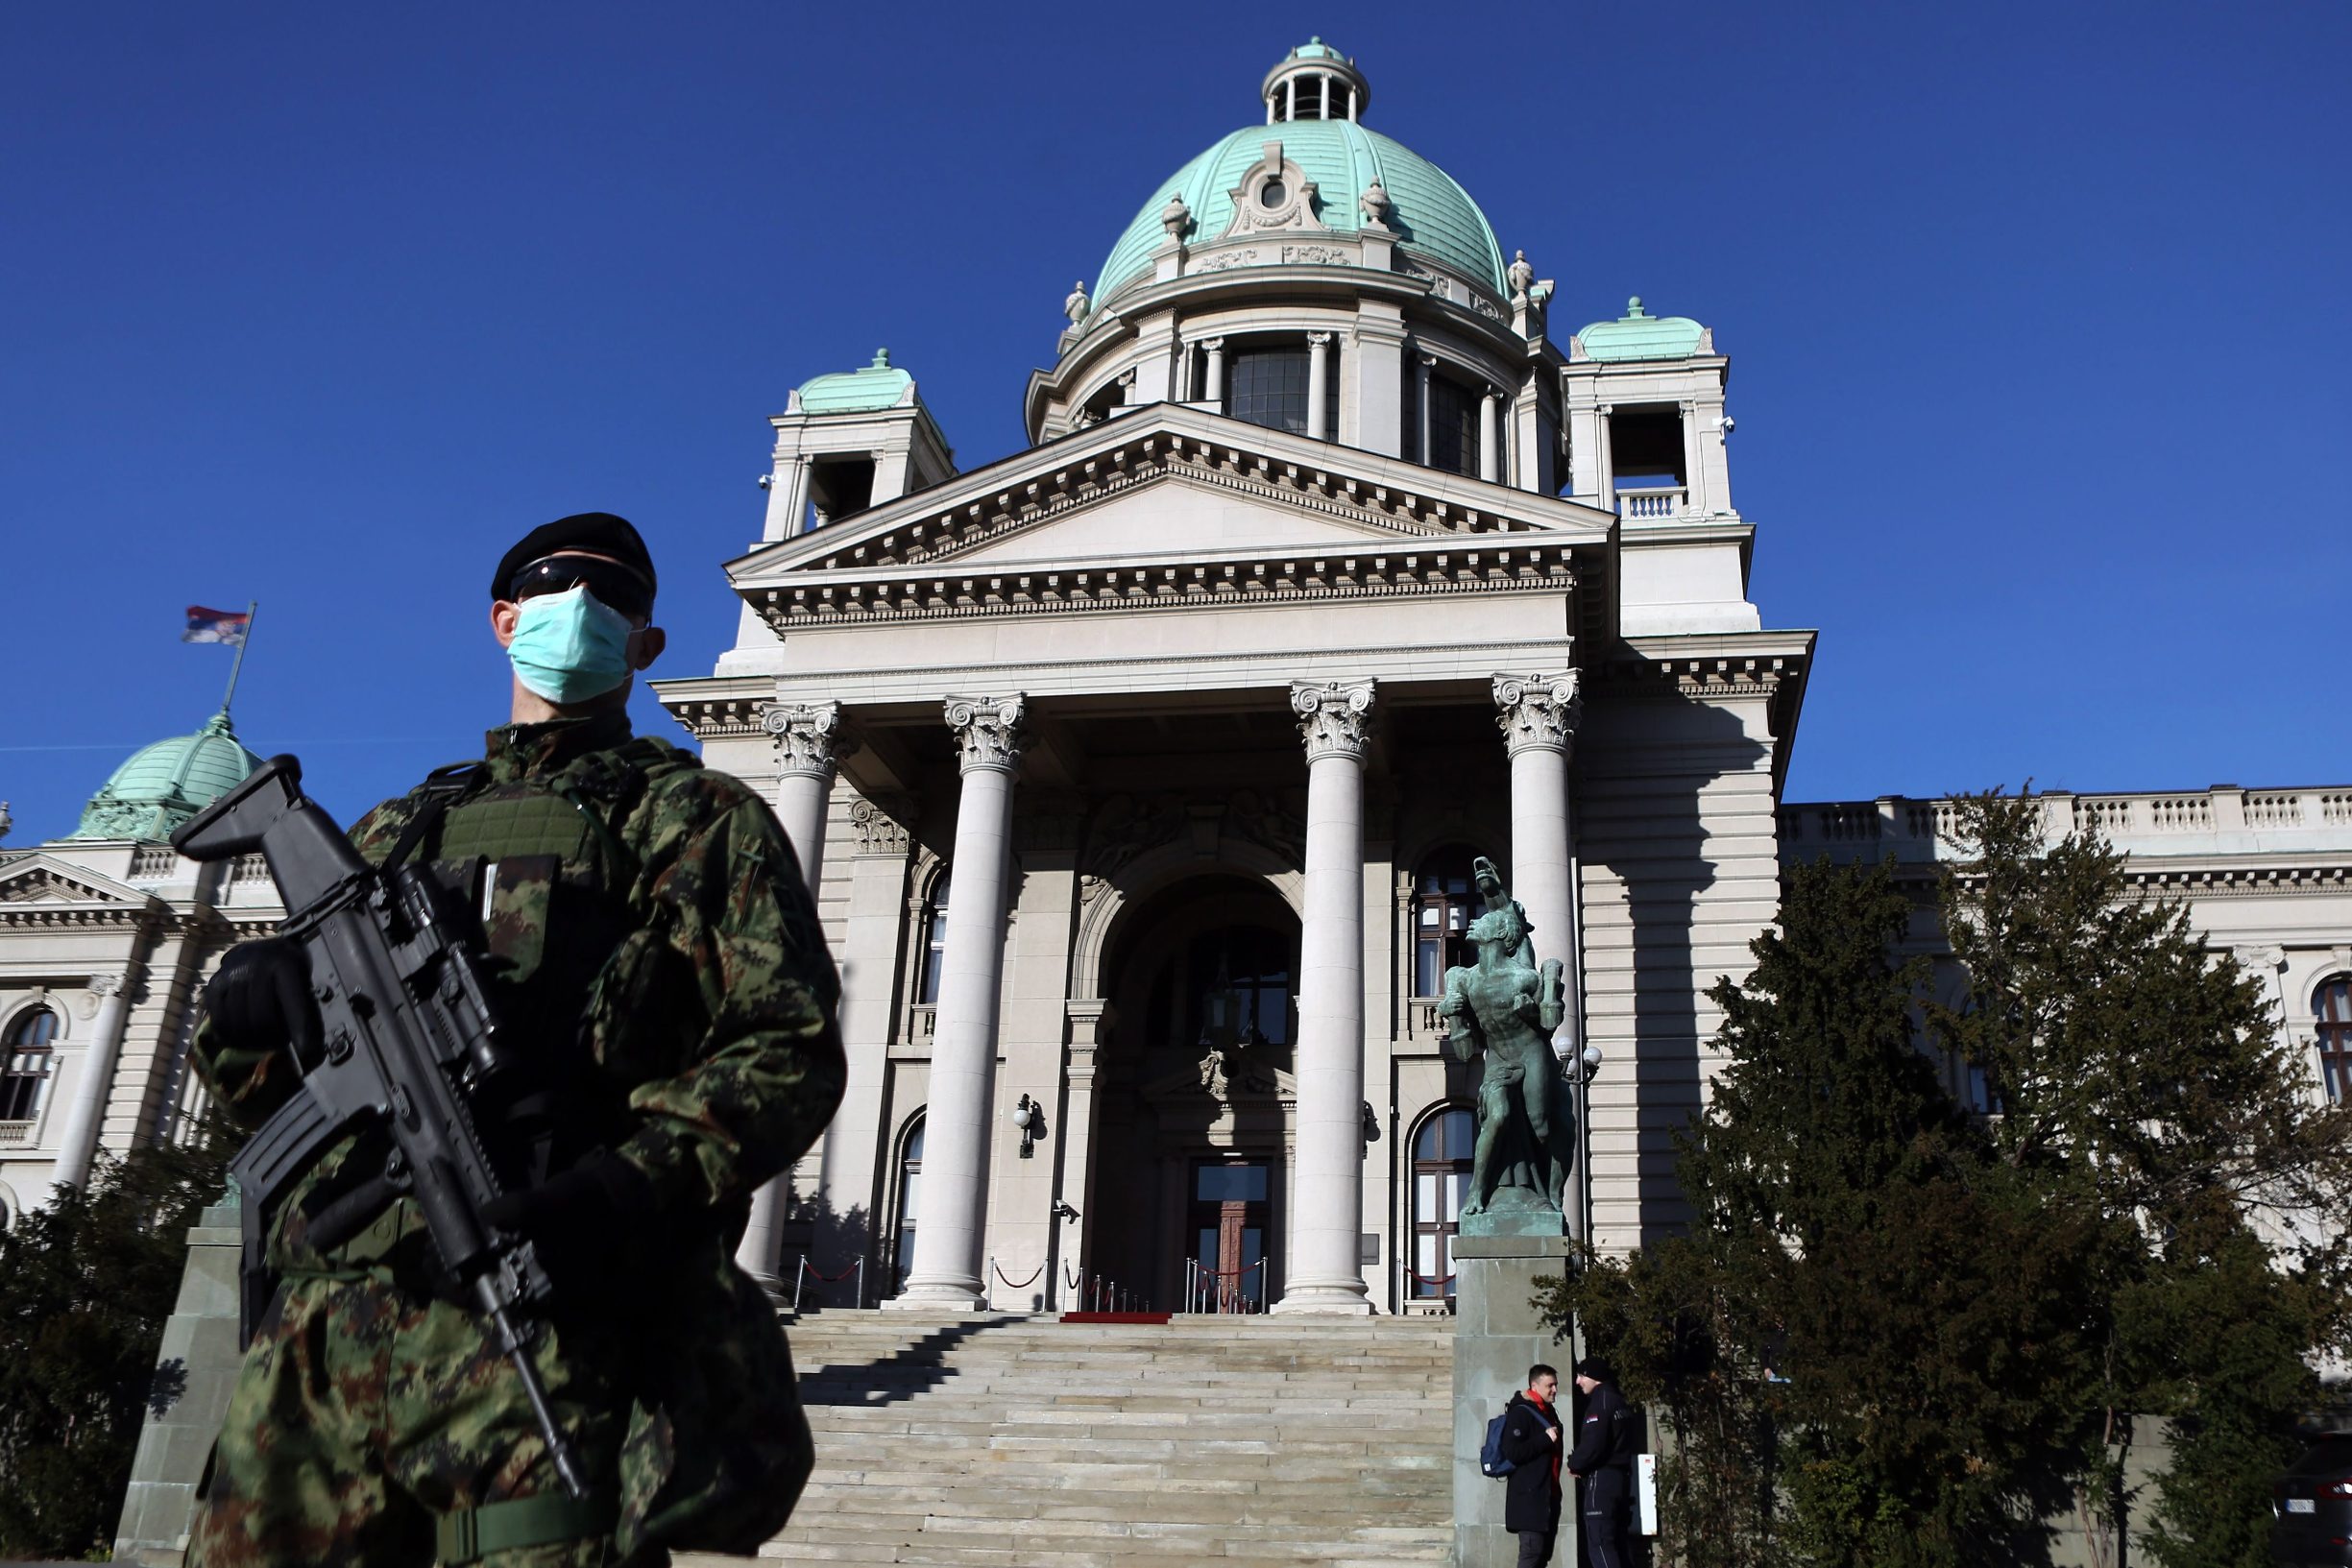 A Serbian Army soldier wearing gloves and a face masks as preventive measures against COVID-19 (novel Coronavirus) stands guard in front of the National Assembly in Belgrade on March 16, 2020. - Serbia declared a state of emergency on March 15, 2020 to halt the spread of the new coronavirus, shutting down many public spaces, deploying soldiers to guard hospitals and closing the borders to foreigners. Serbia's President Aleksandar Vucic said the new restrictions were necessary to 